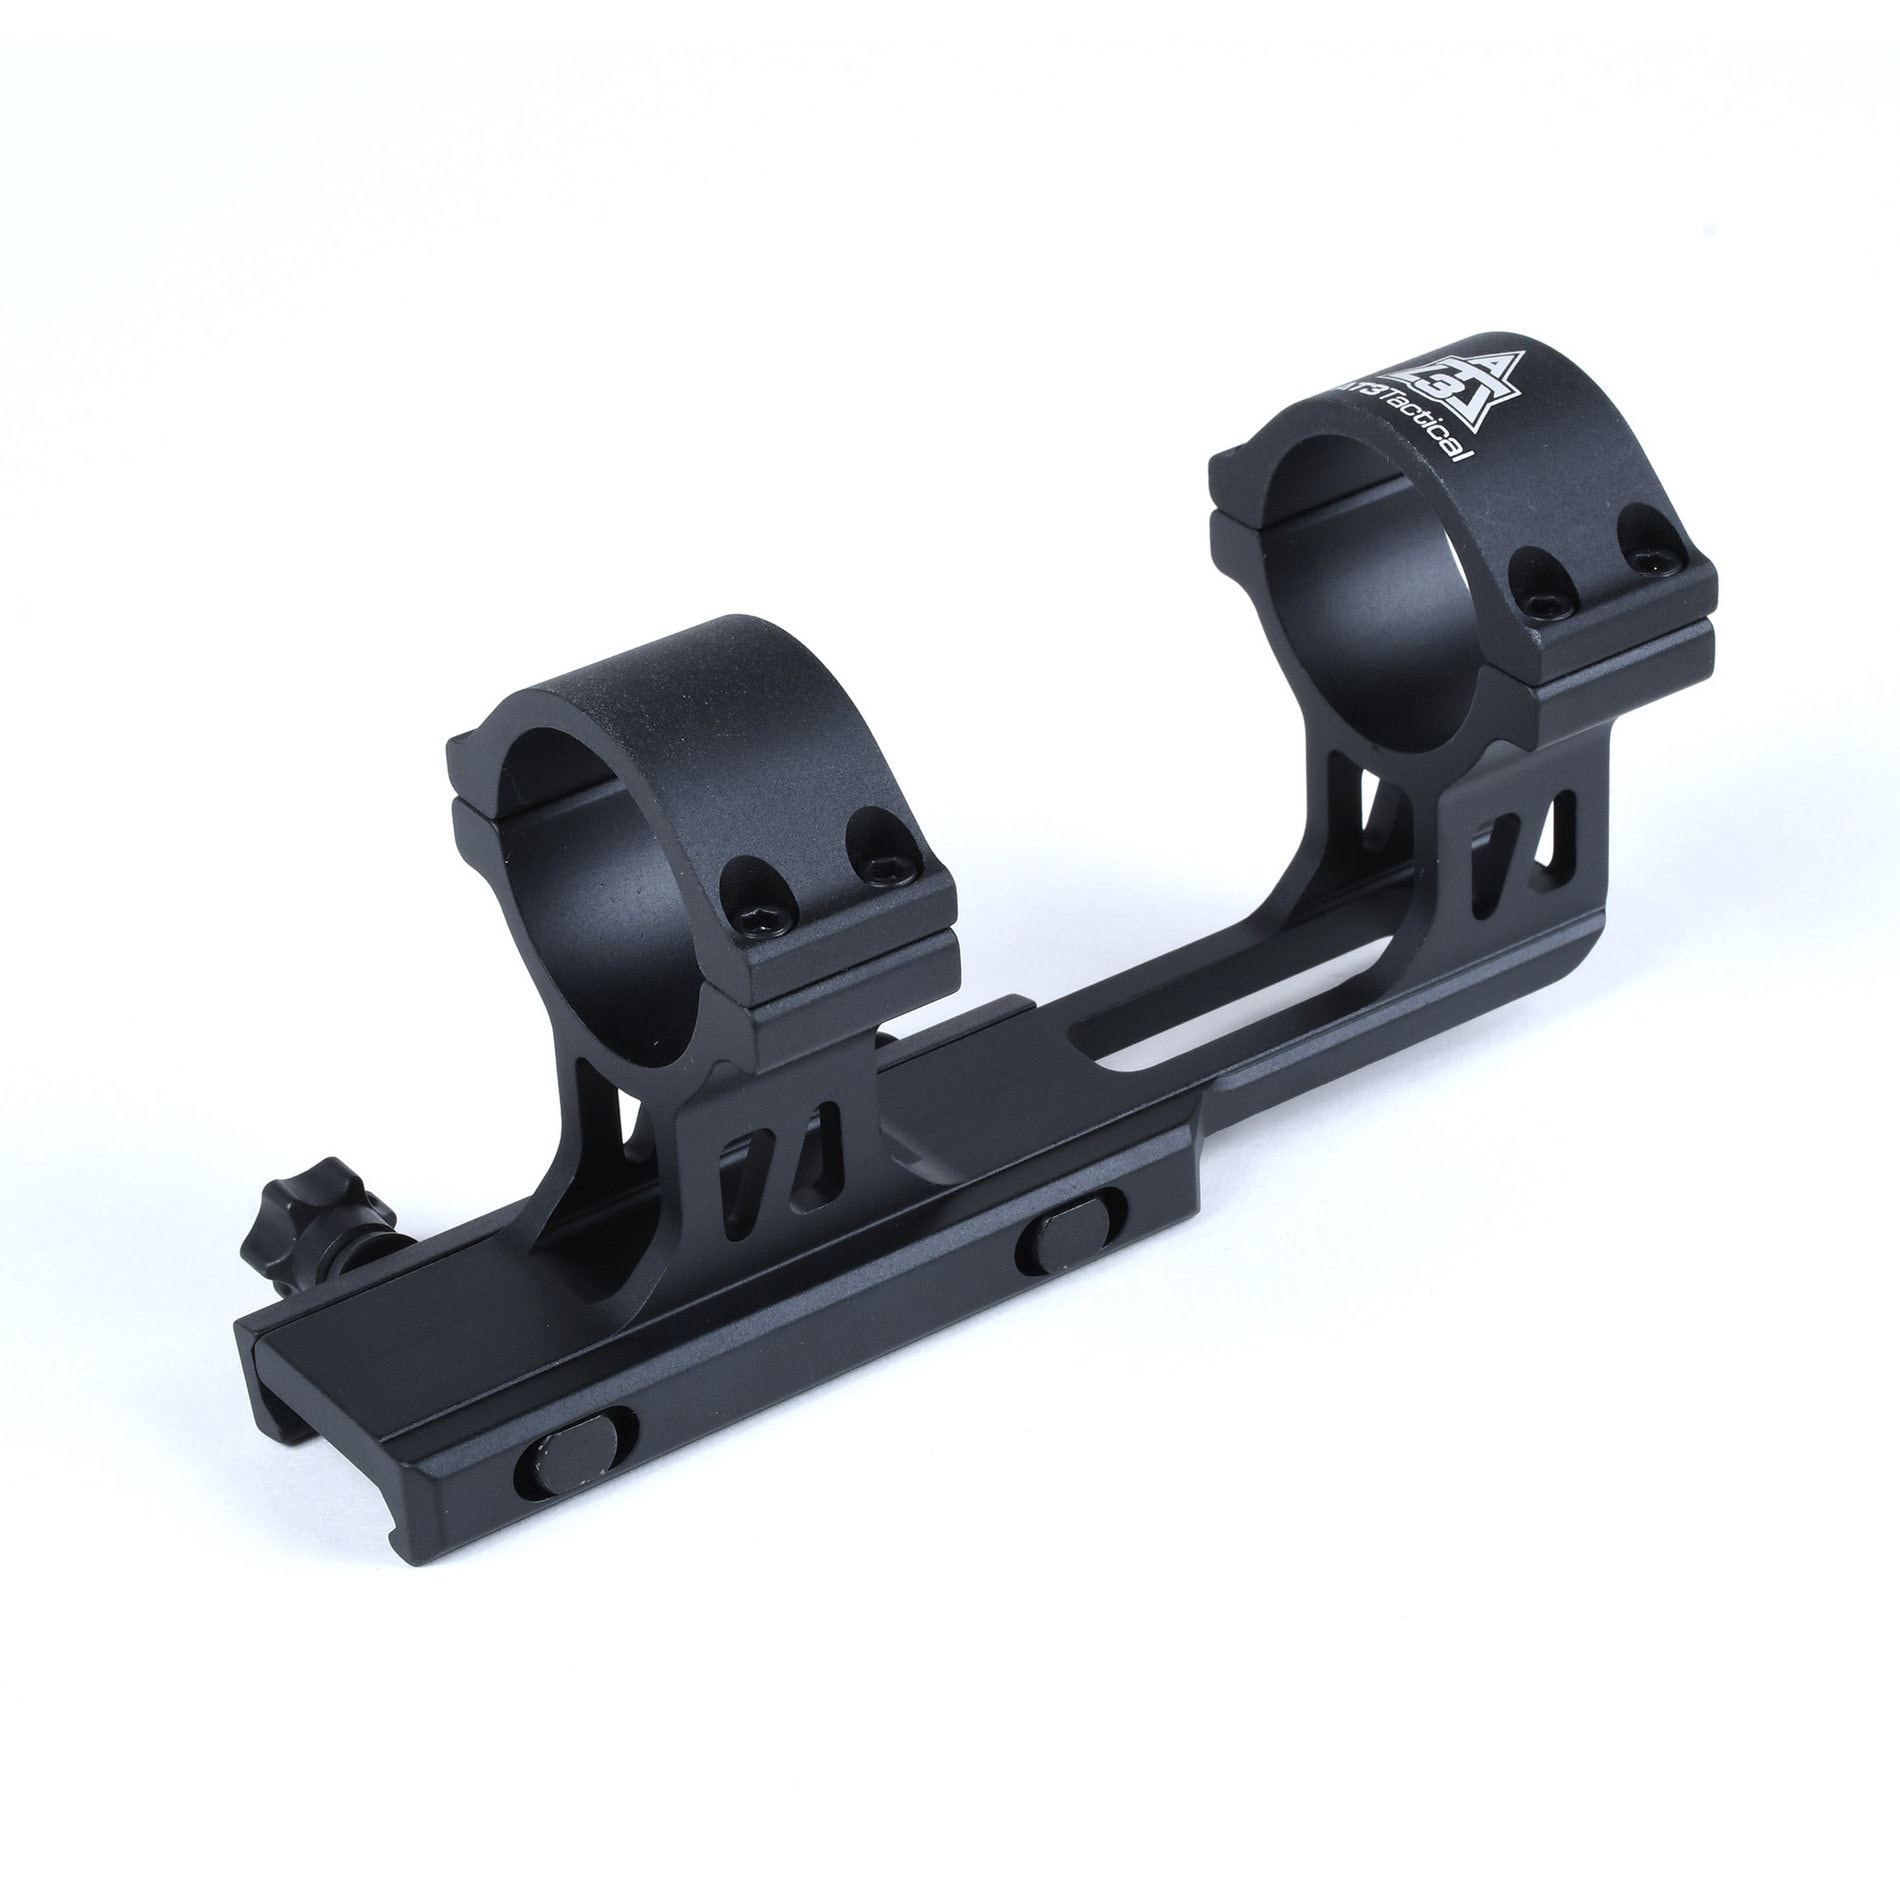 25mm/30mm Tactical High Scope Ring Flat Top Mount Picatinny Rail for Rifle Scope 